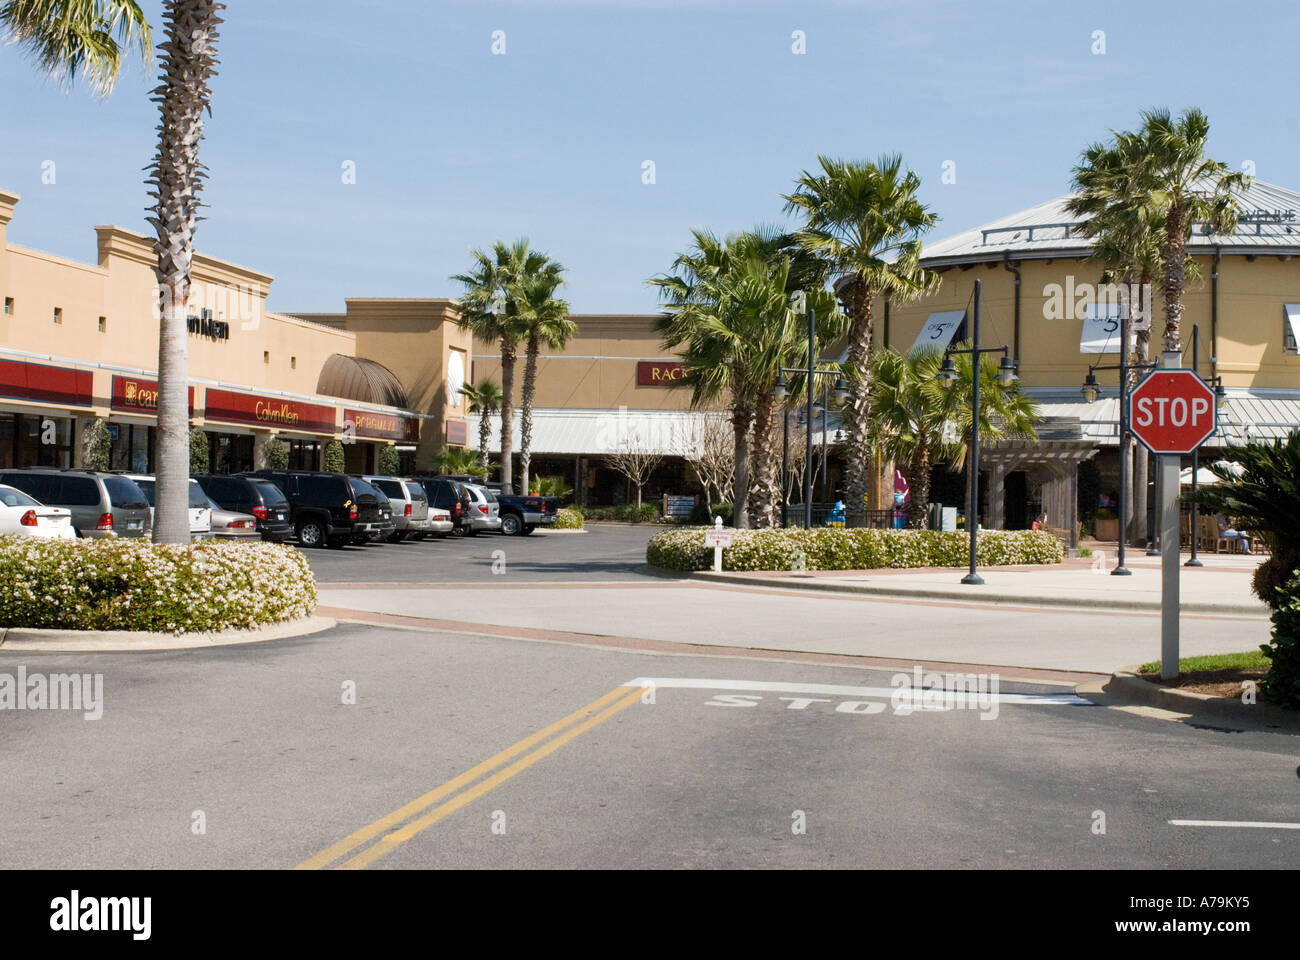 Large factory outlet mall in Destin Florida USA A shopping meca ...